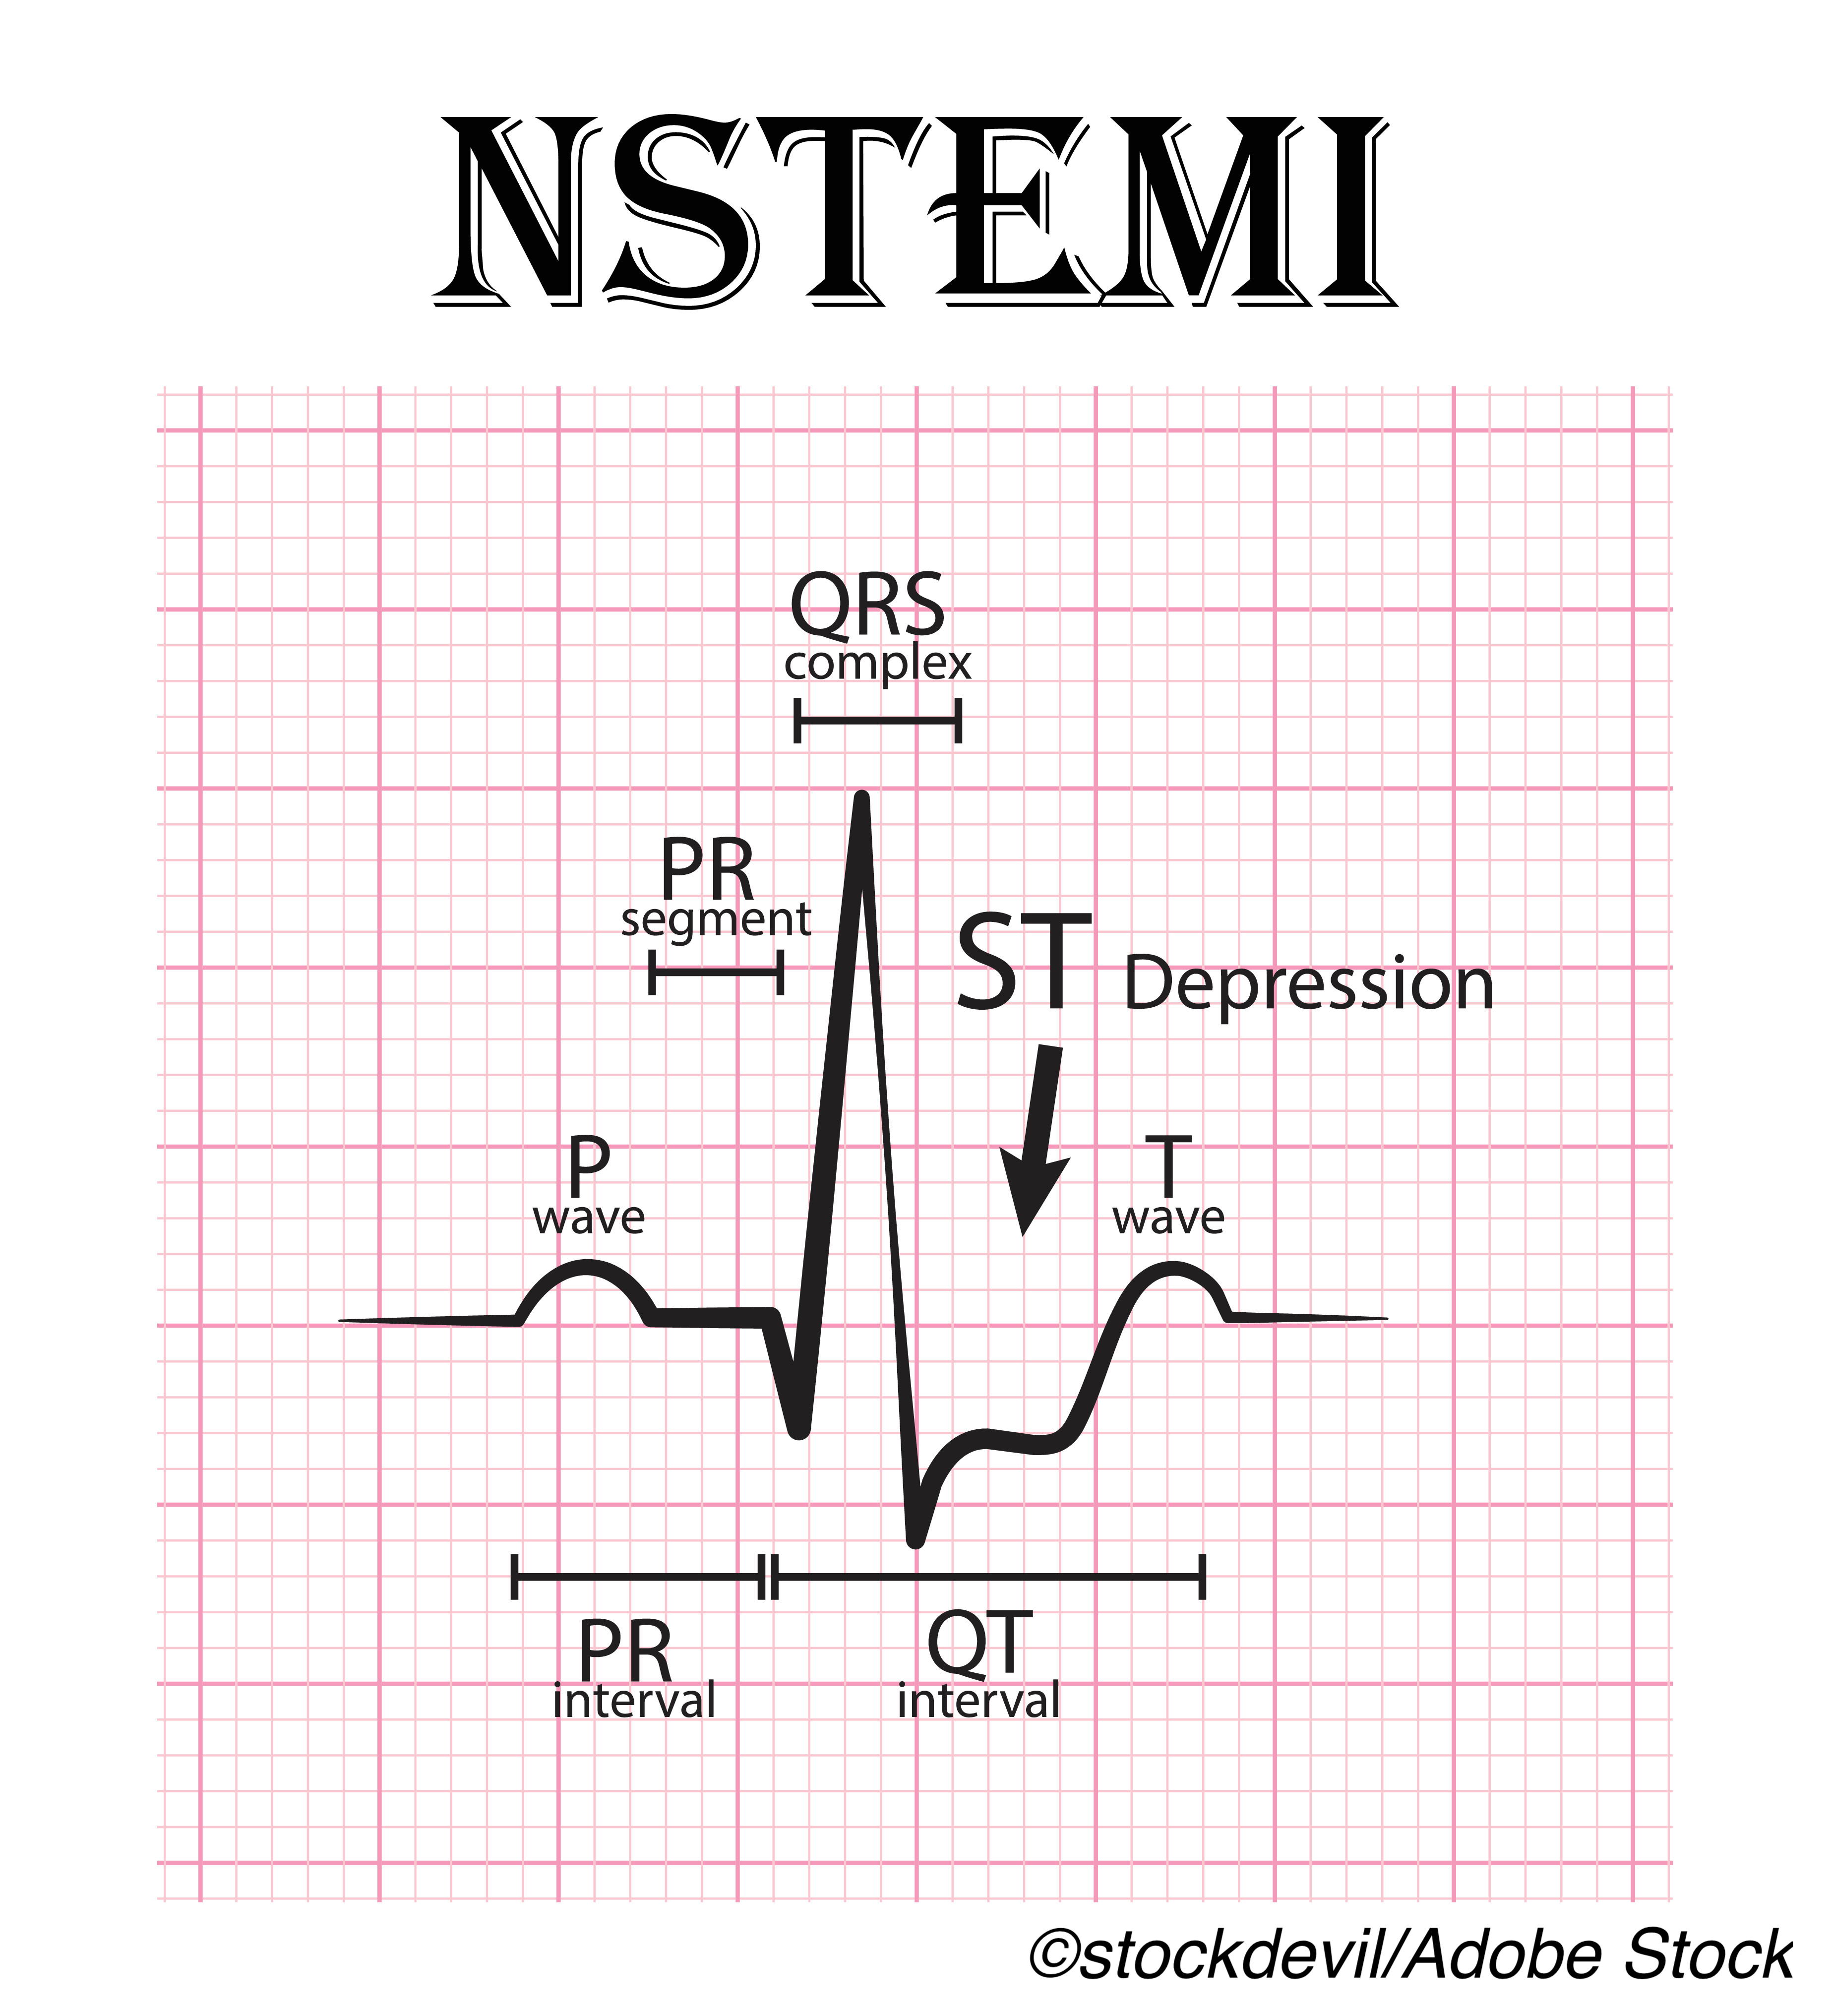 Mortality Benefit for Invasive NSTEMI Strategy Holds Over Age 80